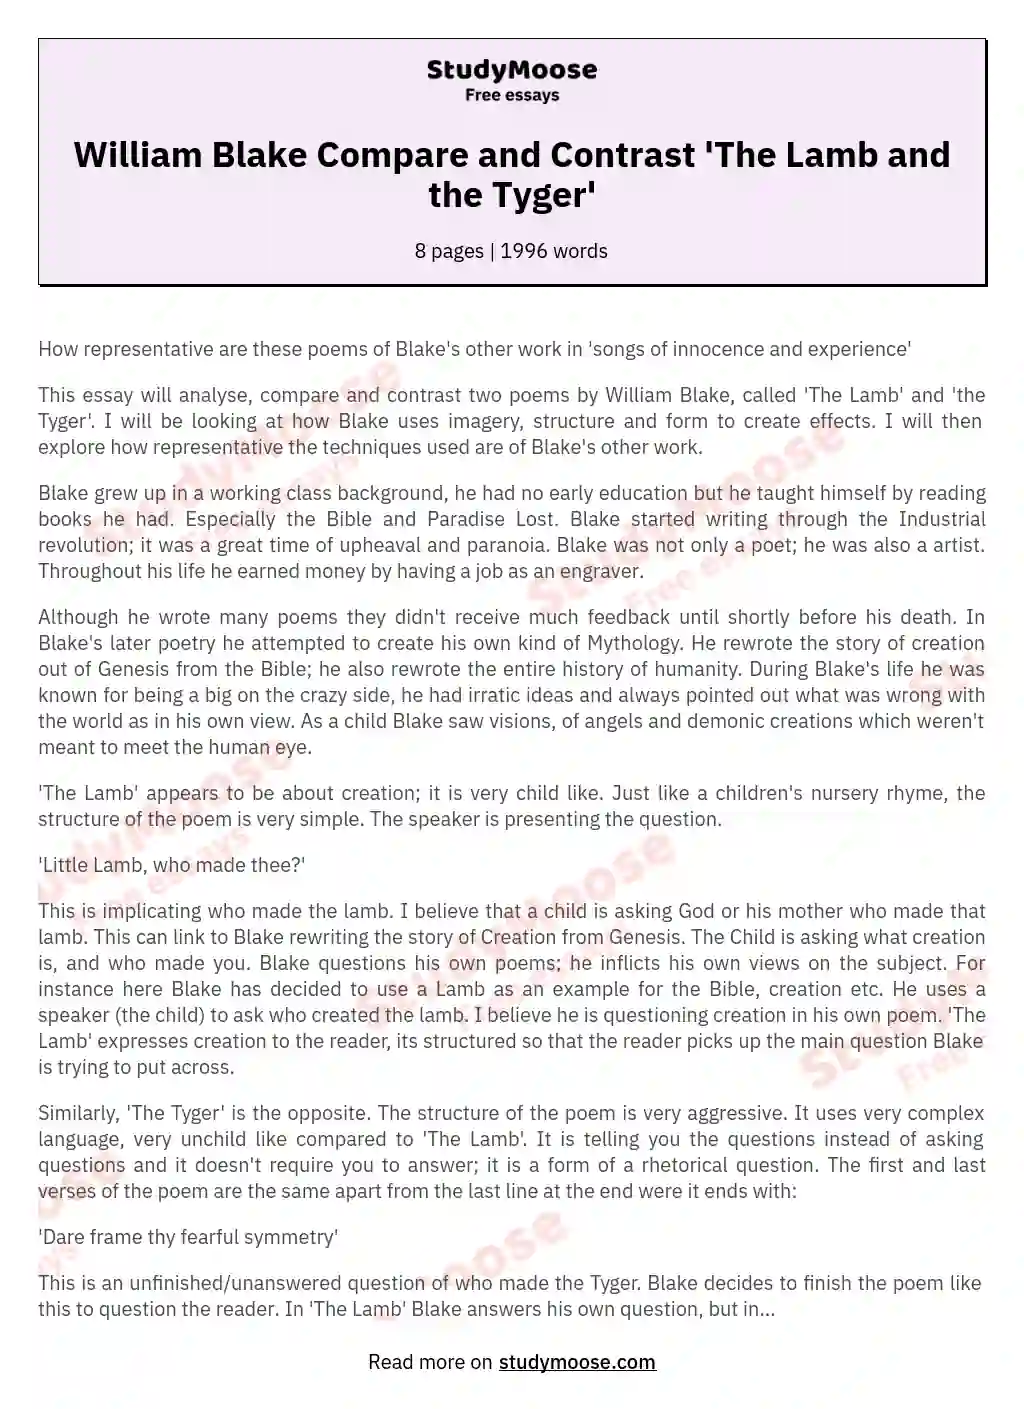 William Blake Compare and Contrast 'The Lamb and the Tyger' essay